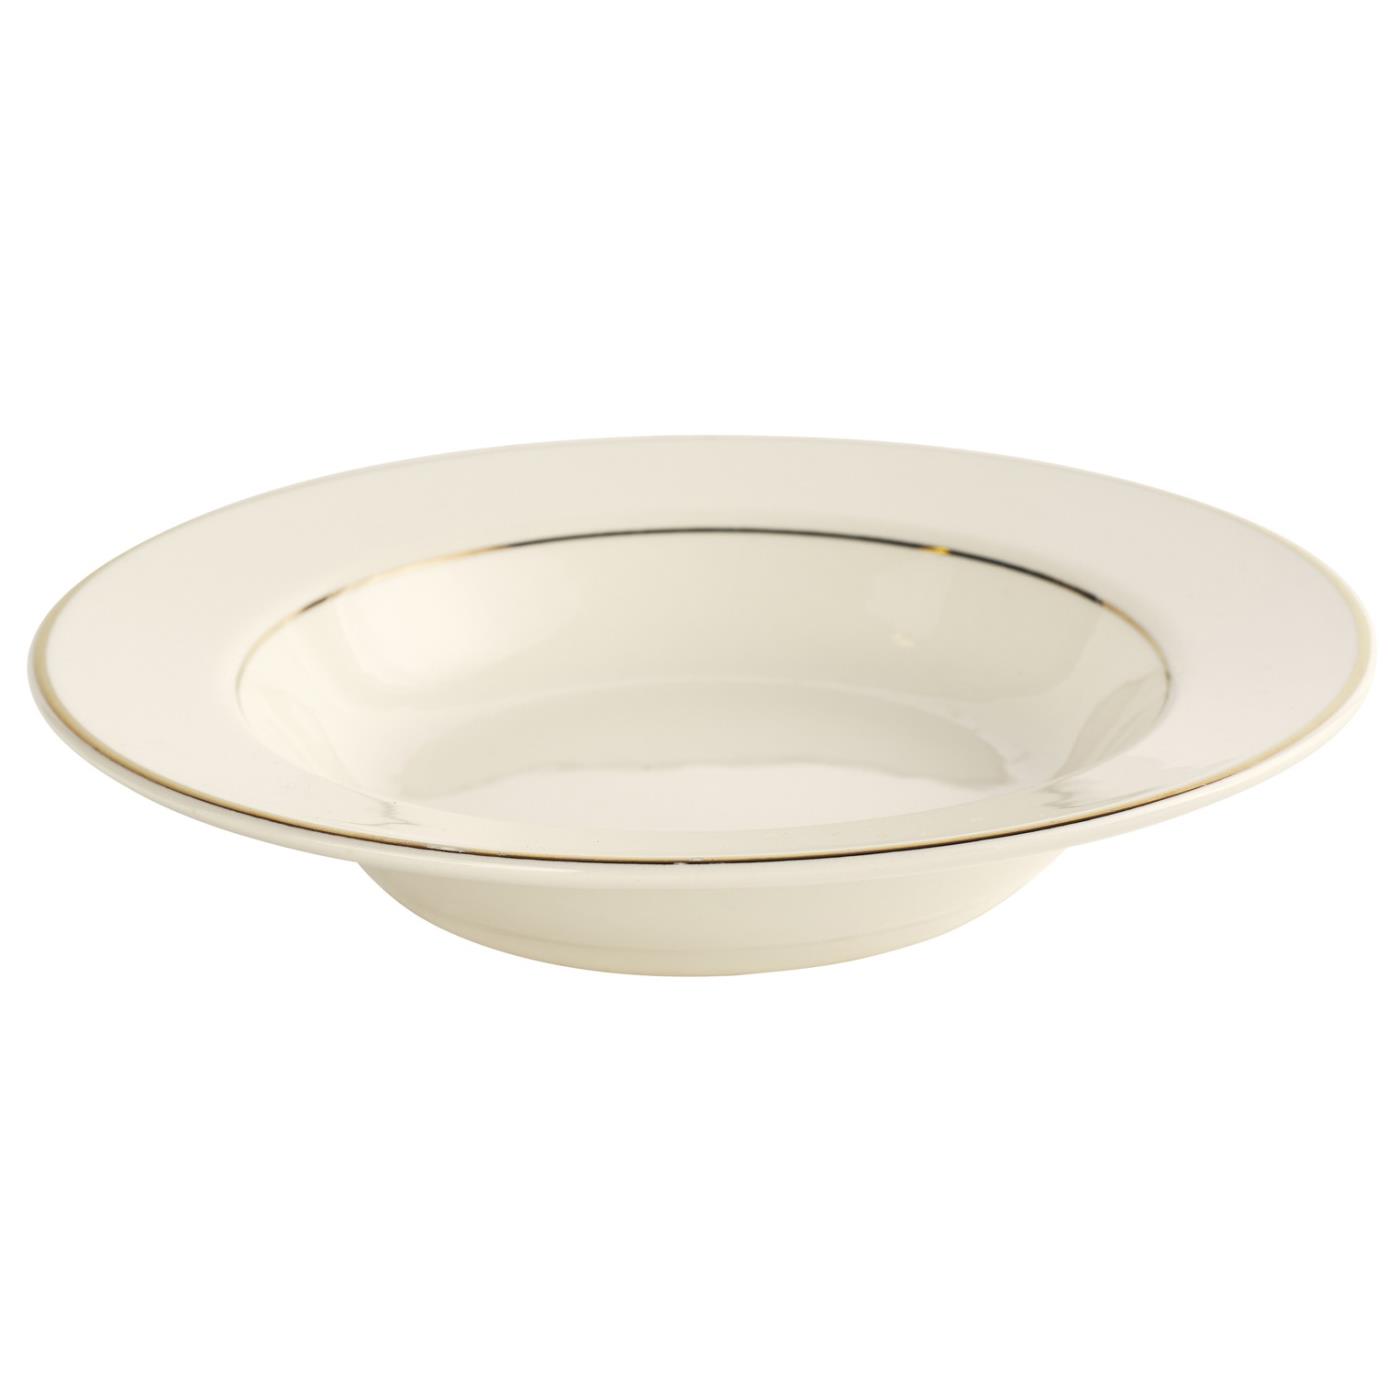 Ecru with Gold Rim Collection -  Soup Bowl 8"